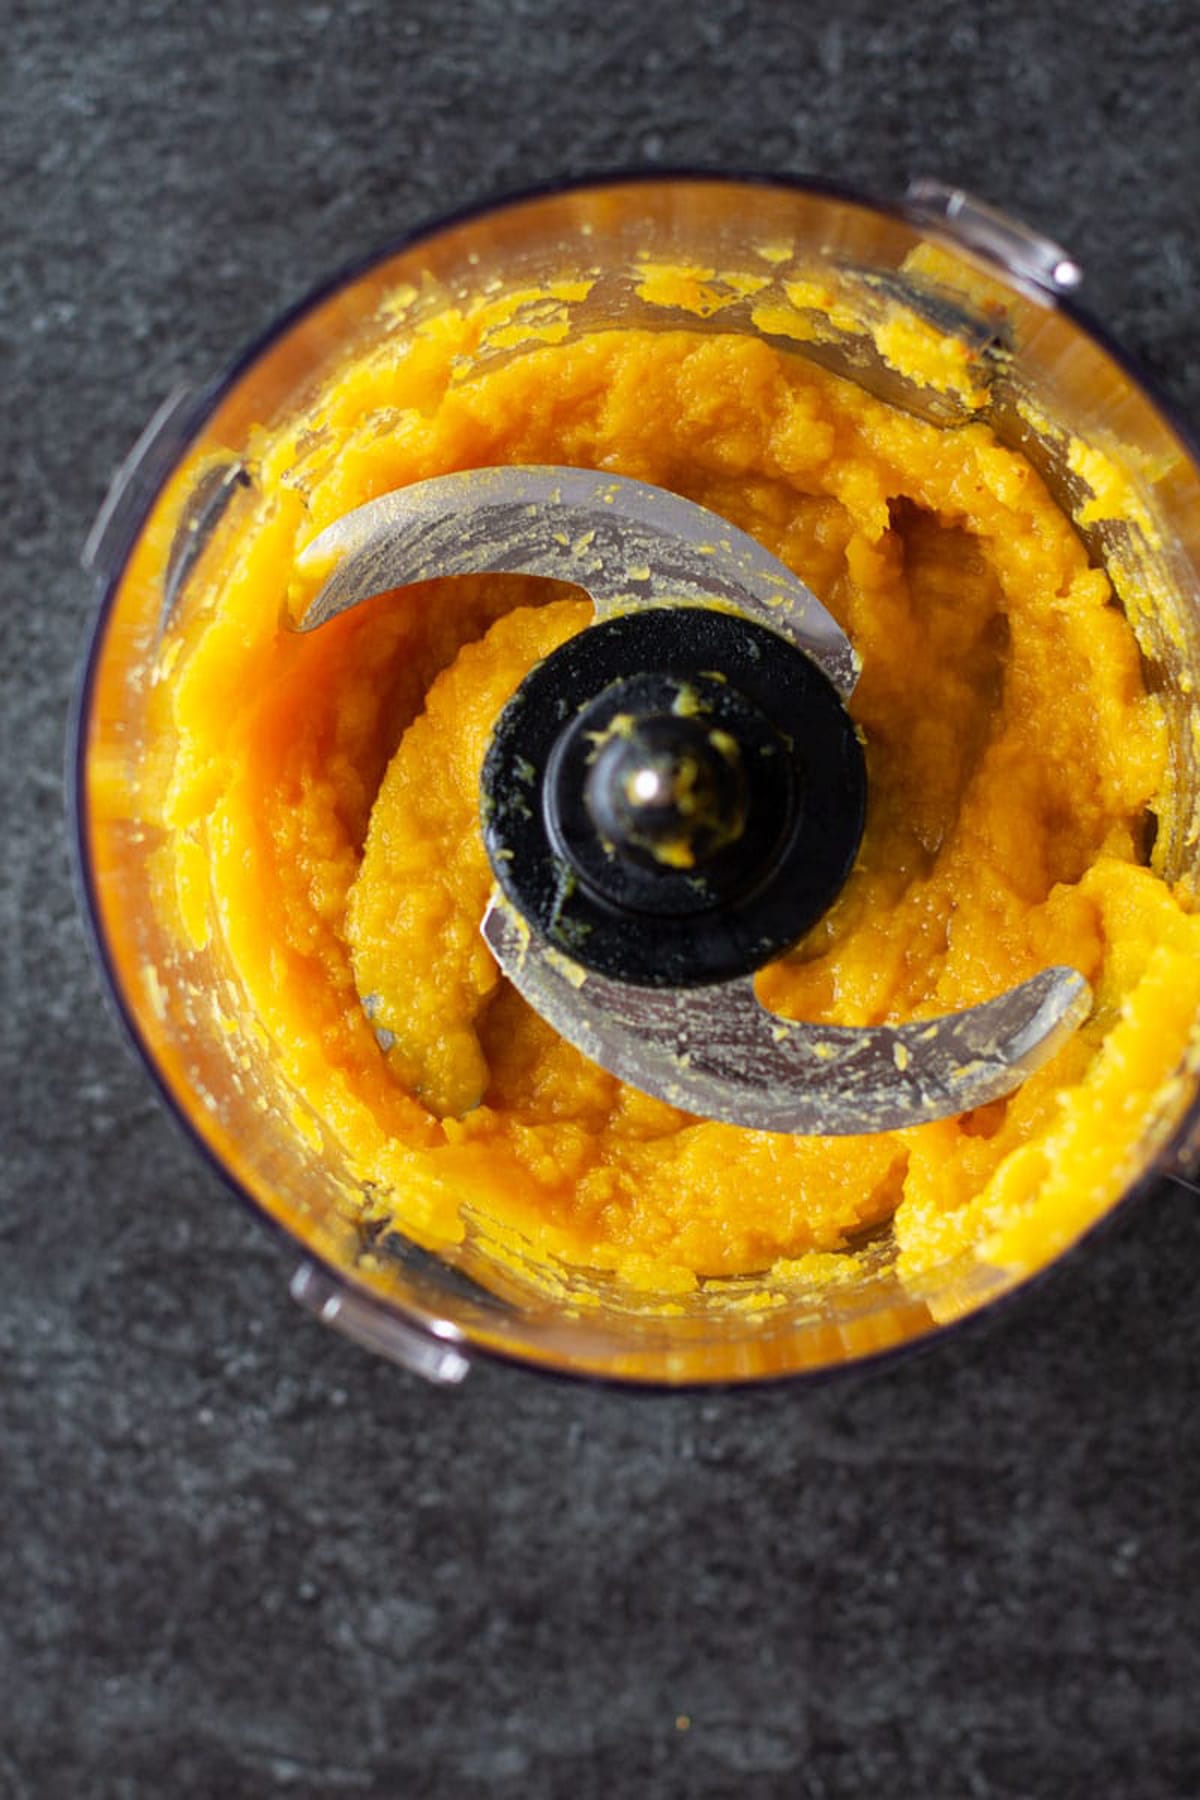 Food processor containing pureed squash on a black countertop.